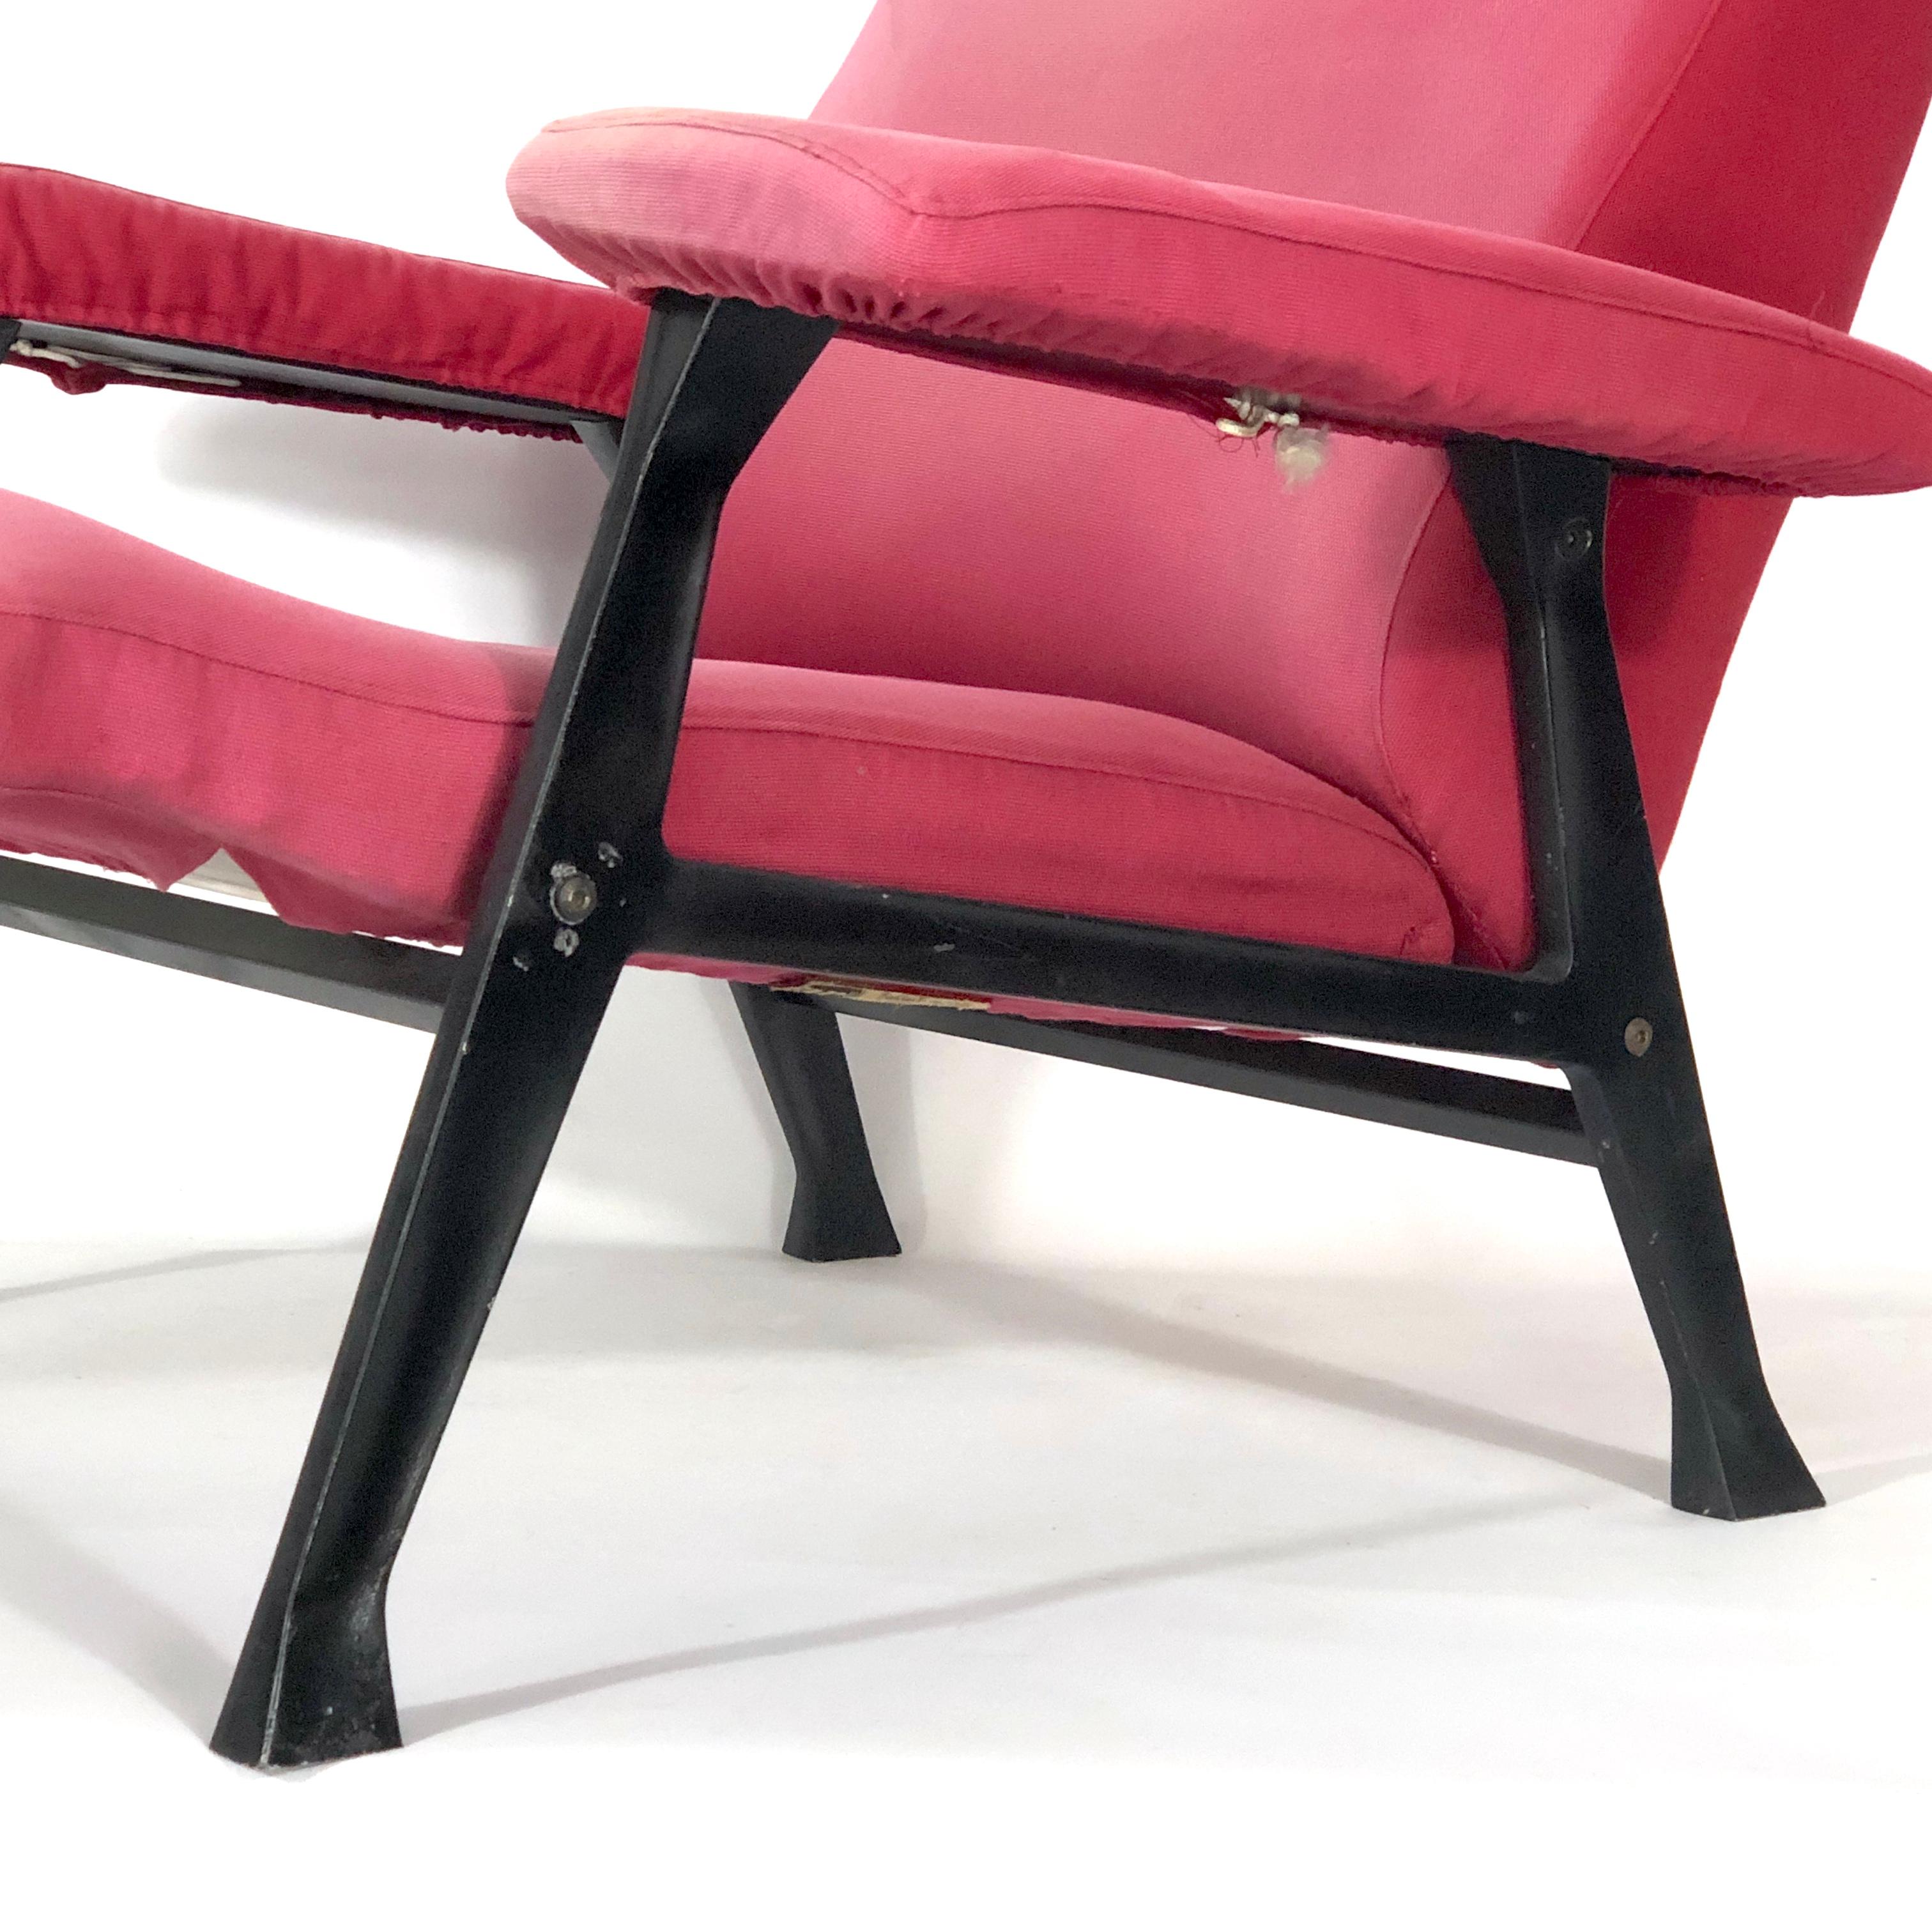 Steel Roberto Menghi, 1st Edition Hall Armchair by Arflex, 1950s For Sale